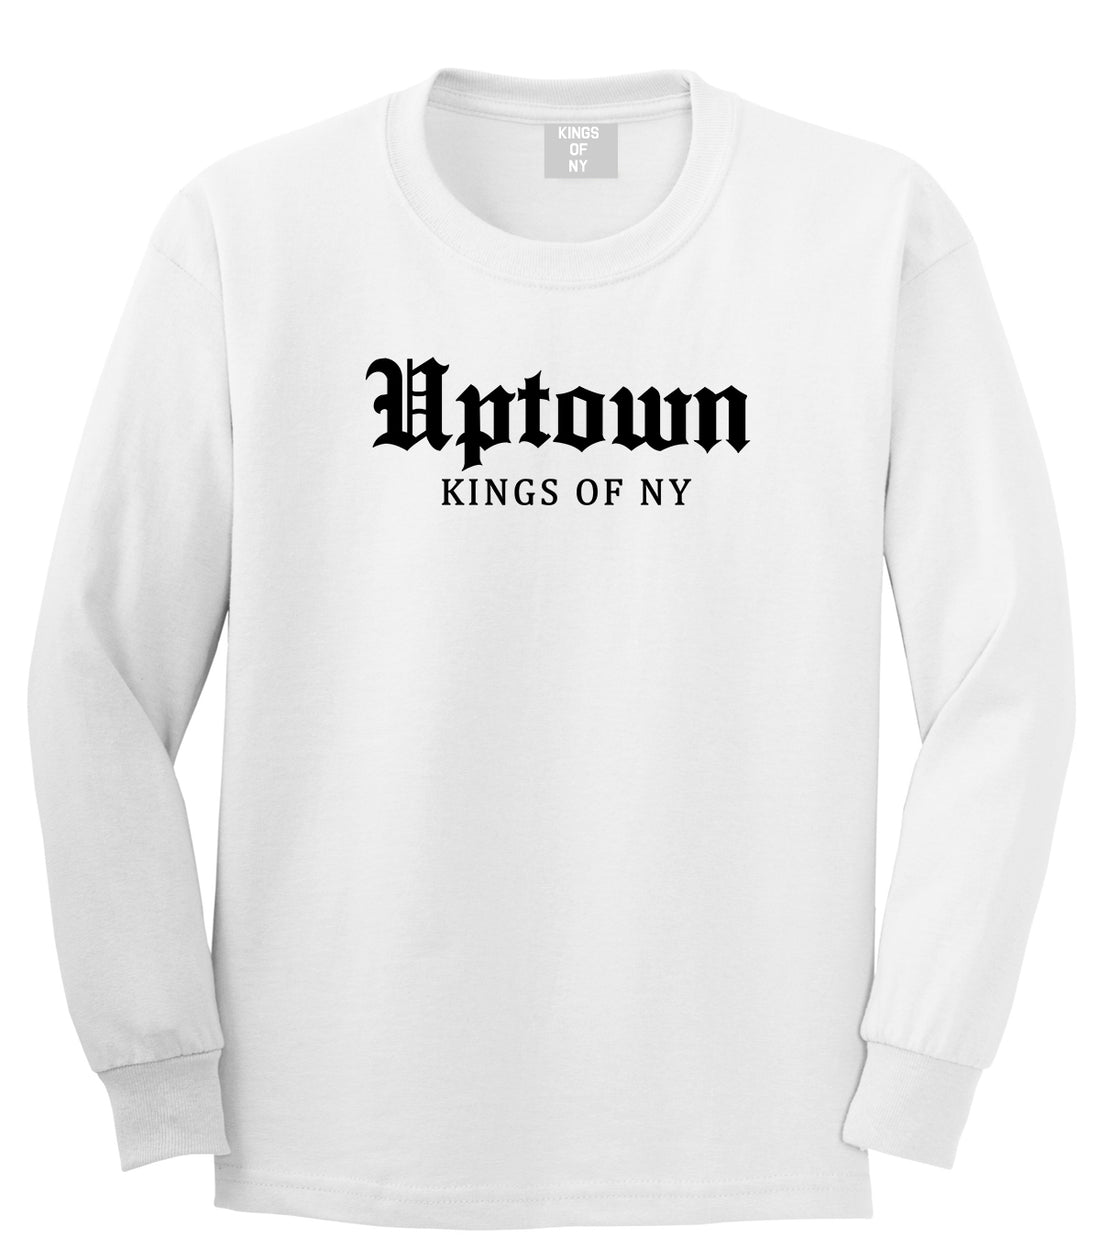 Uptown Old English Mens Long Sleeve T-Shirt White by Kings Of NY